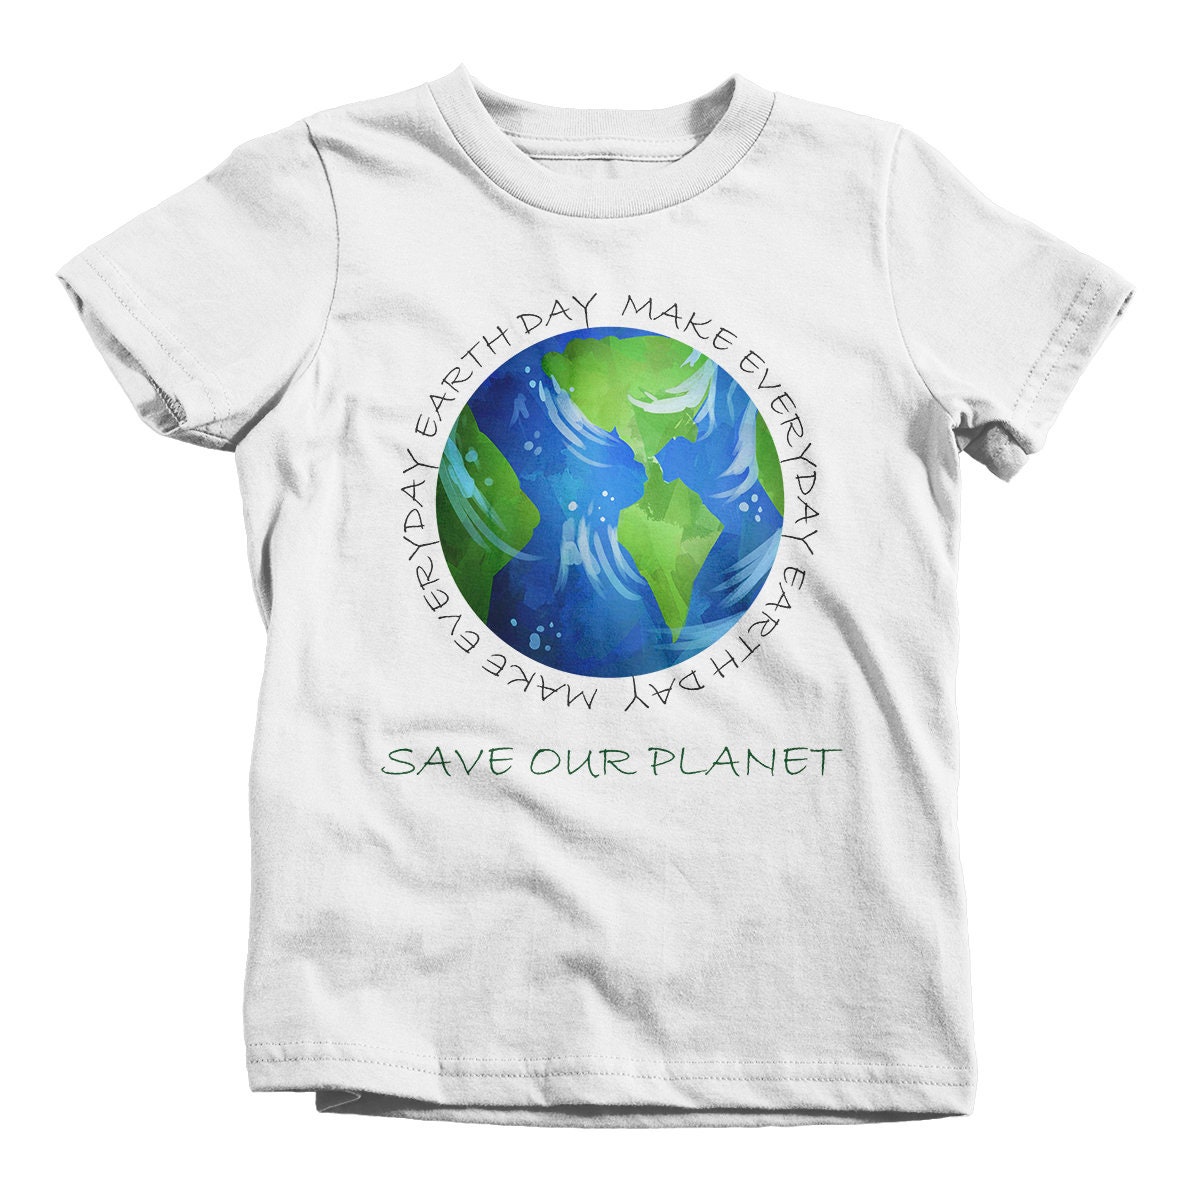 Discover Earth Day T-Shirt Globe Planet Shirt Everyday Save Our Planet T-shirt